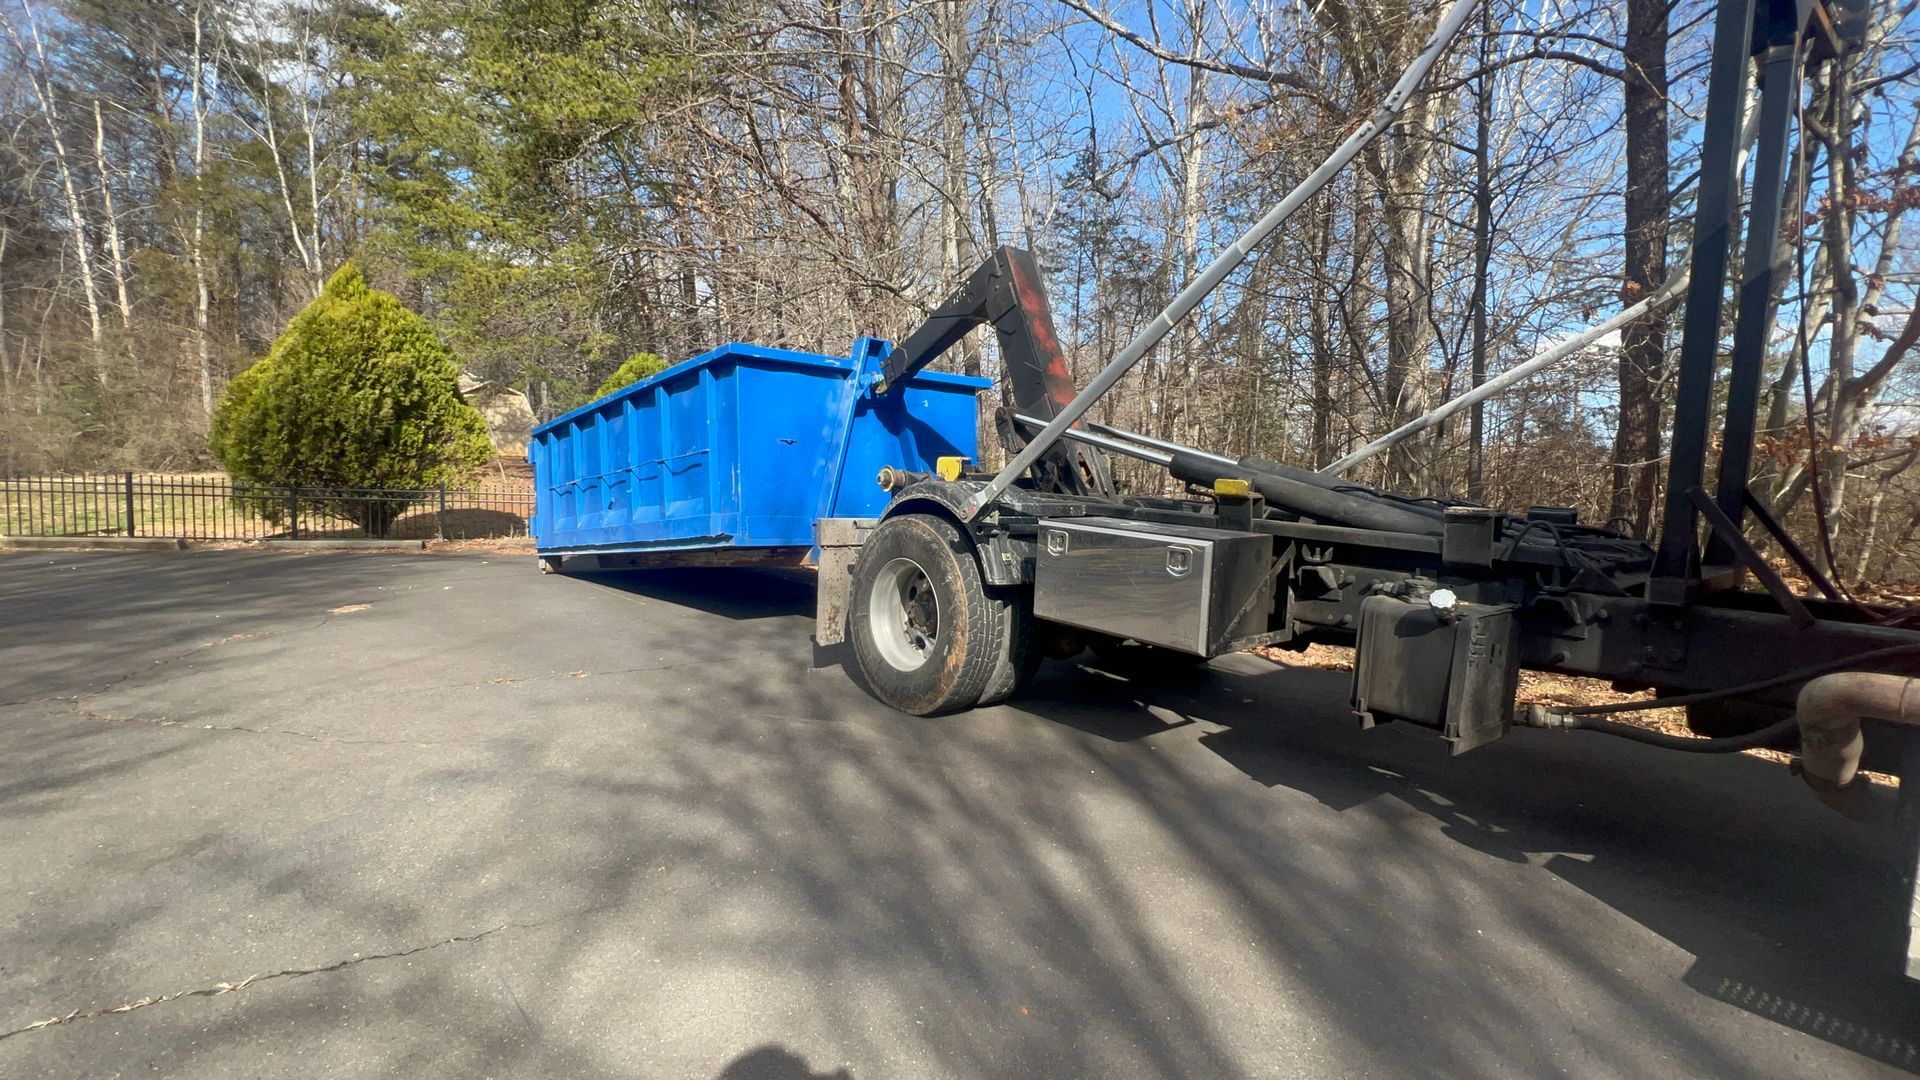 a blue dumpster is being pulled by a dump truck in a parking lot .